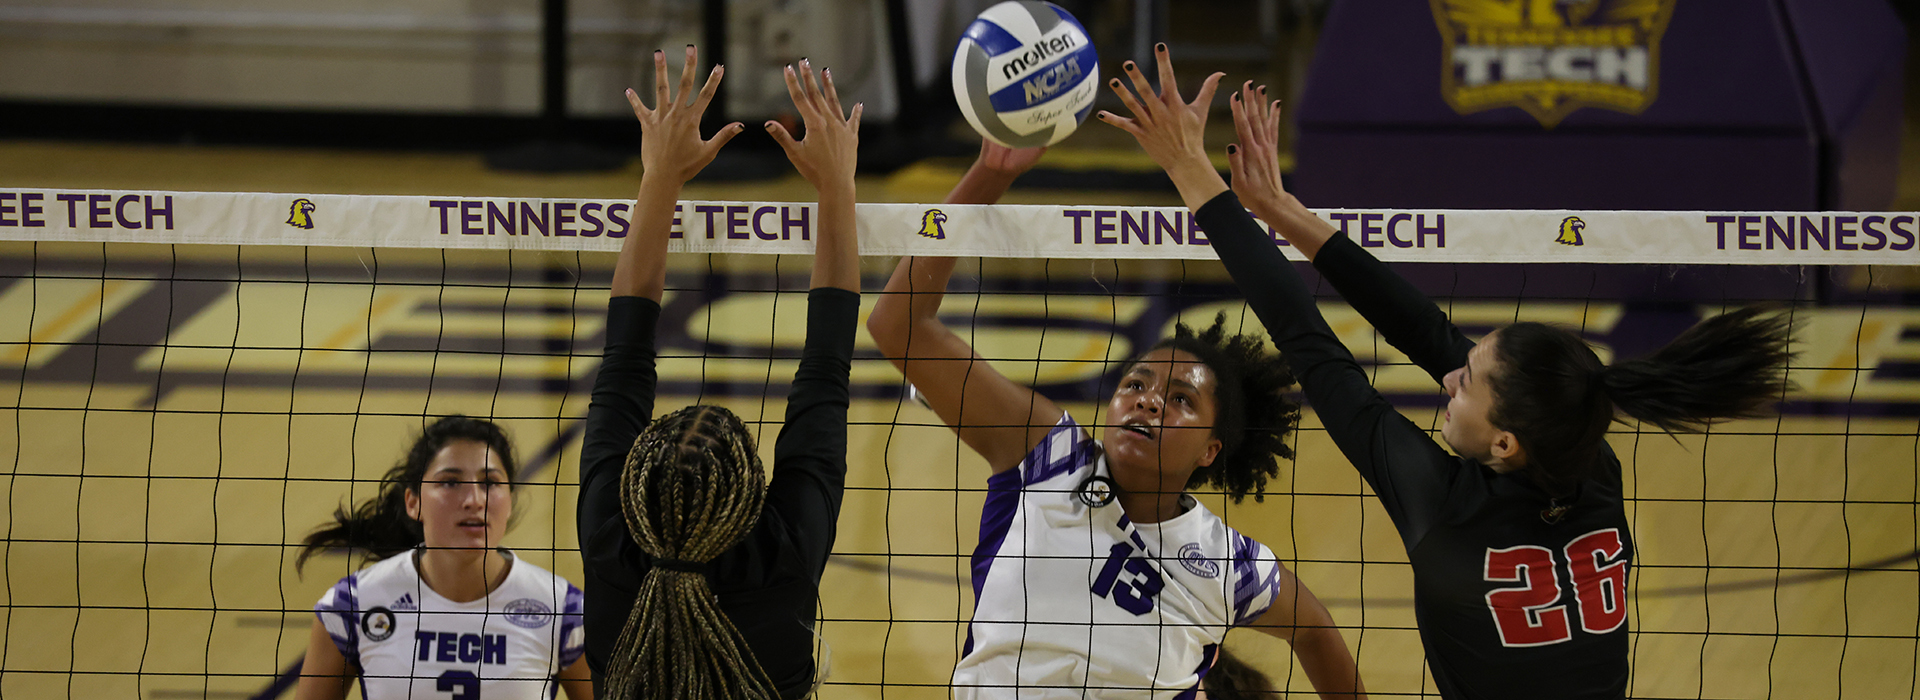 Tech volleyball off to Murray for pair of weekend tilts with Racers